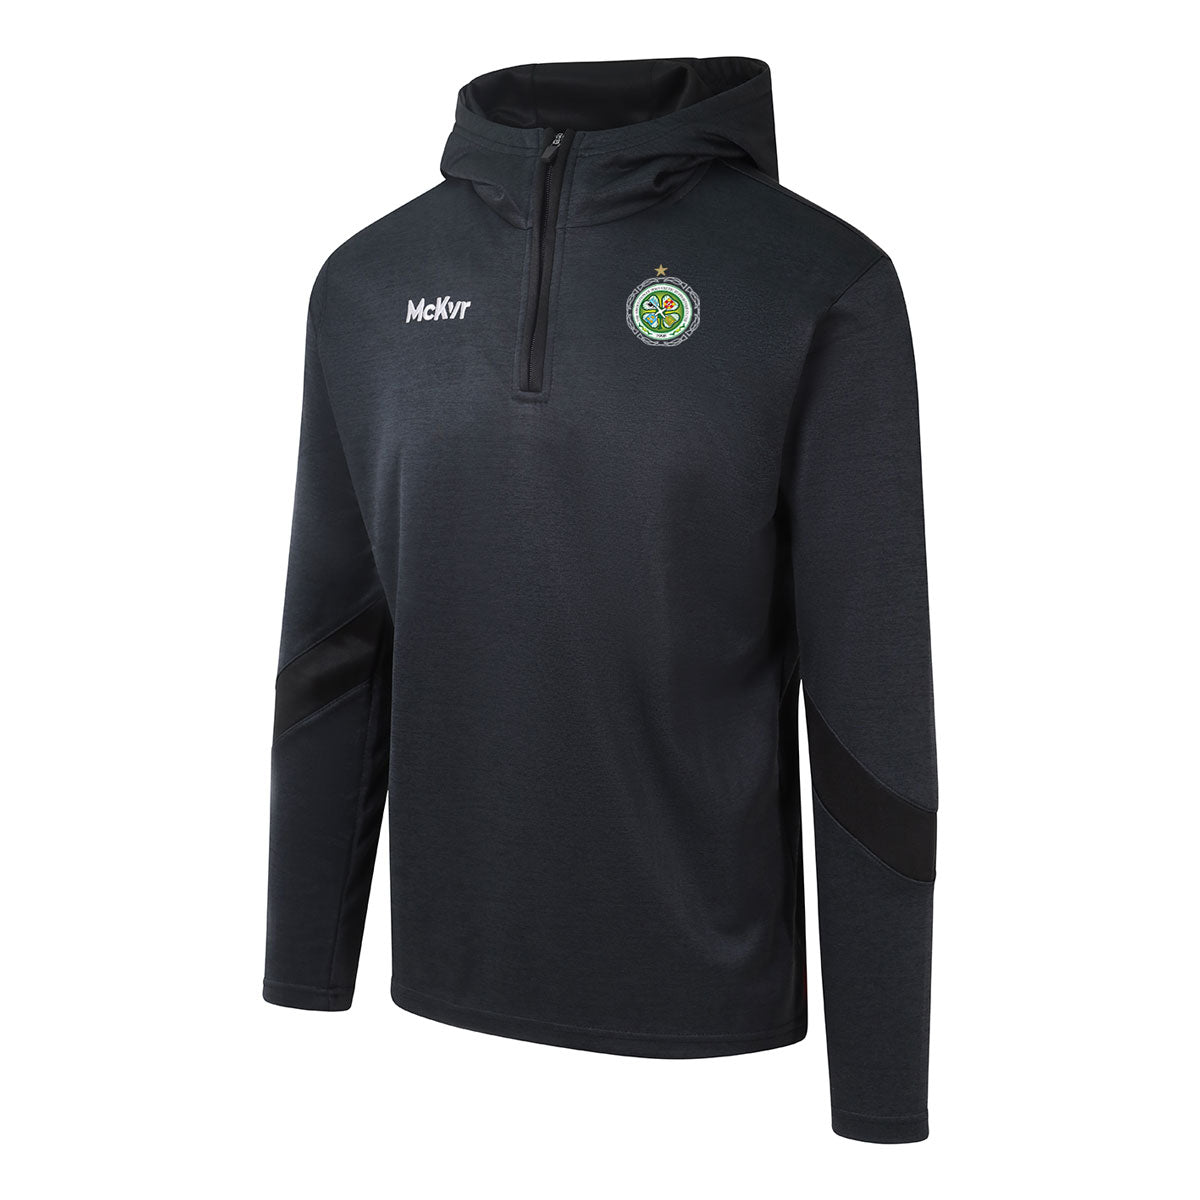 Mc Keever The Association of Irish Celtic Supporters Clubs Core 22 1/4 Zip Hoodie - Adult - Black